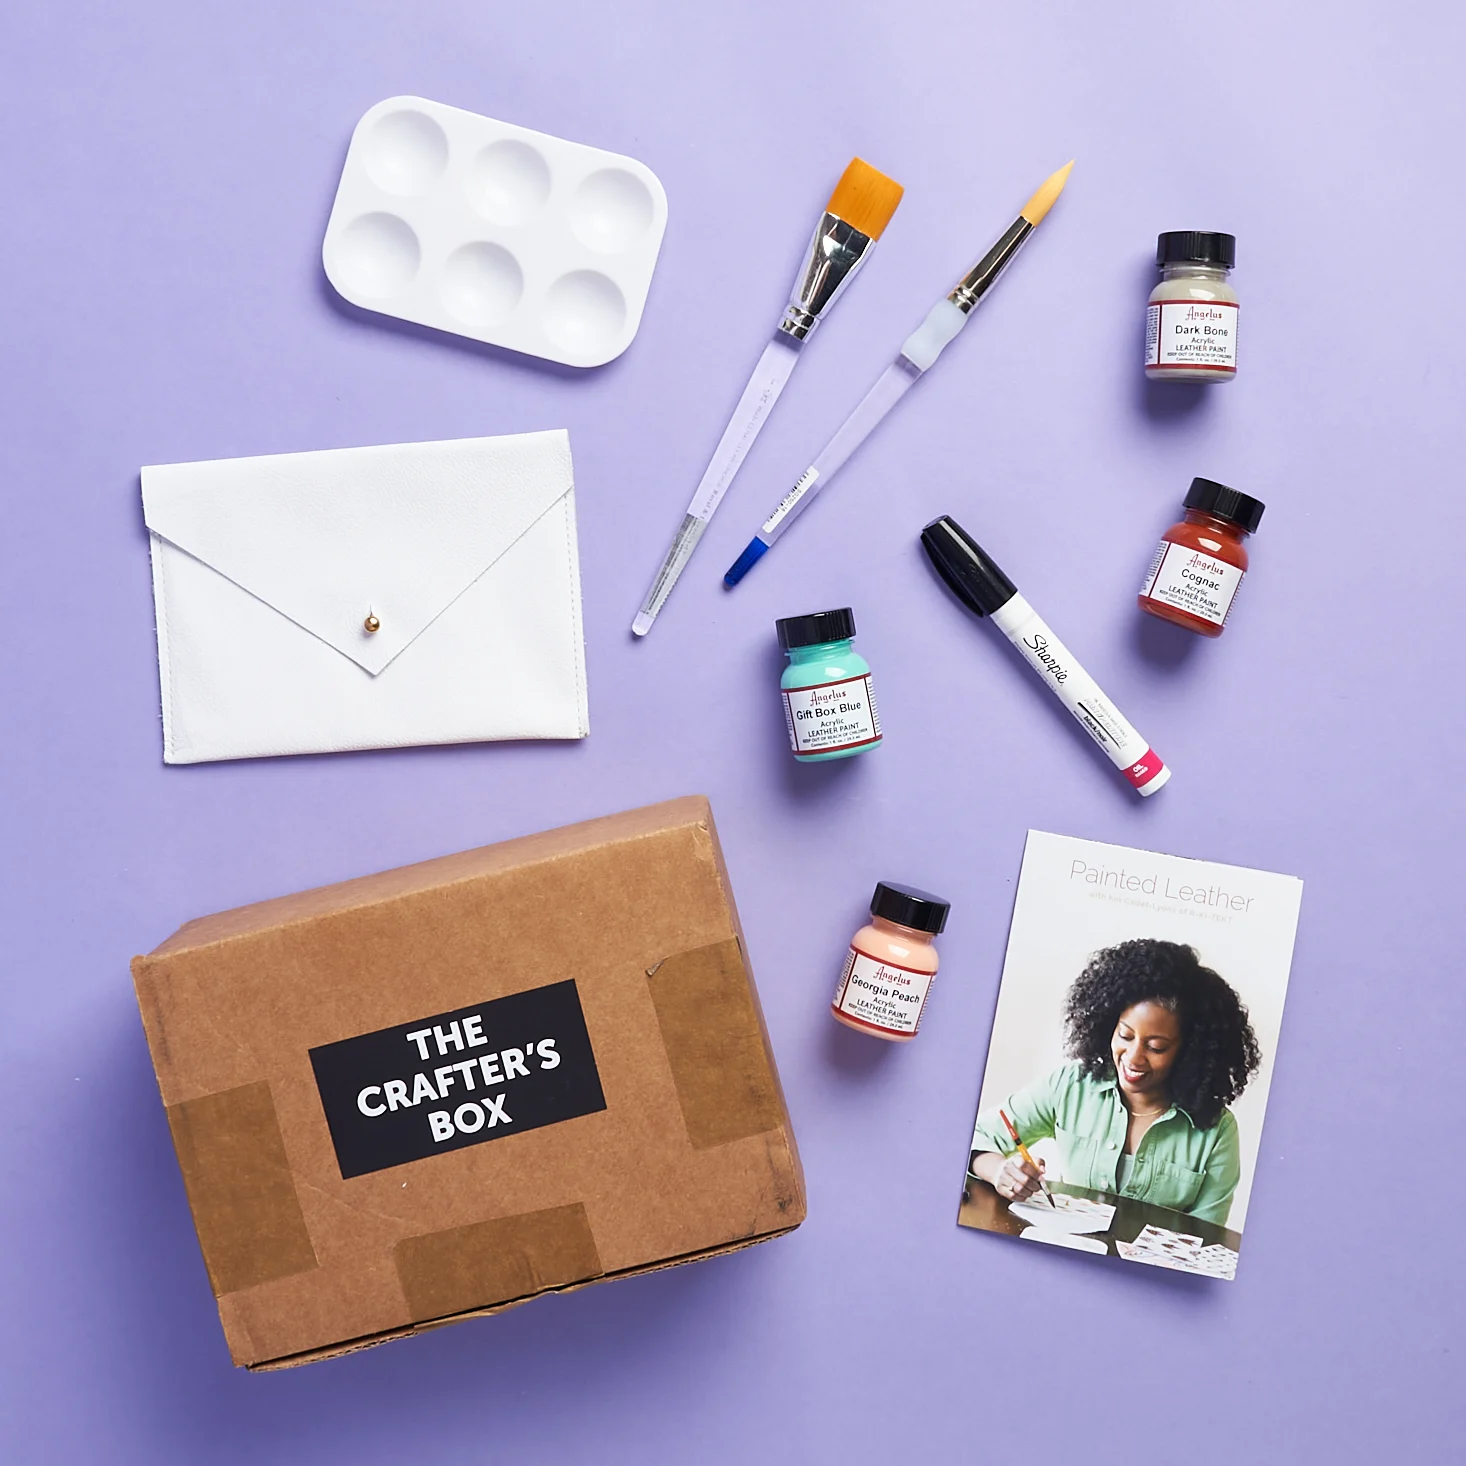 The Crafter’s Box ‘Painted Leather’ Review – June 2021